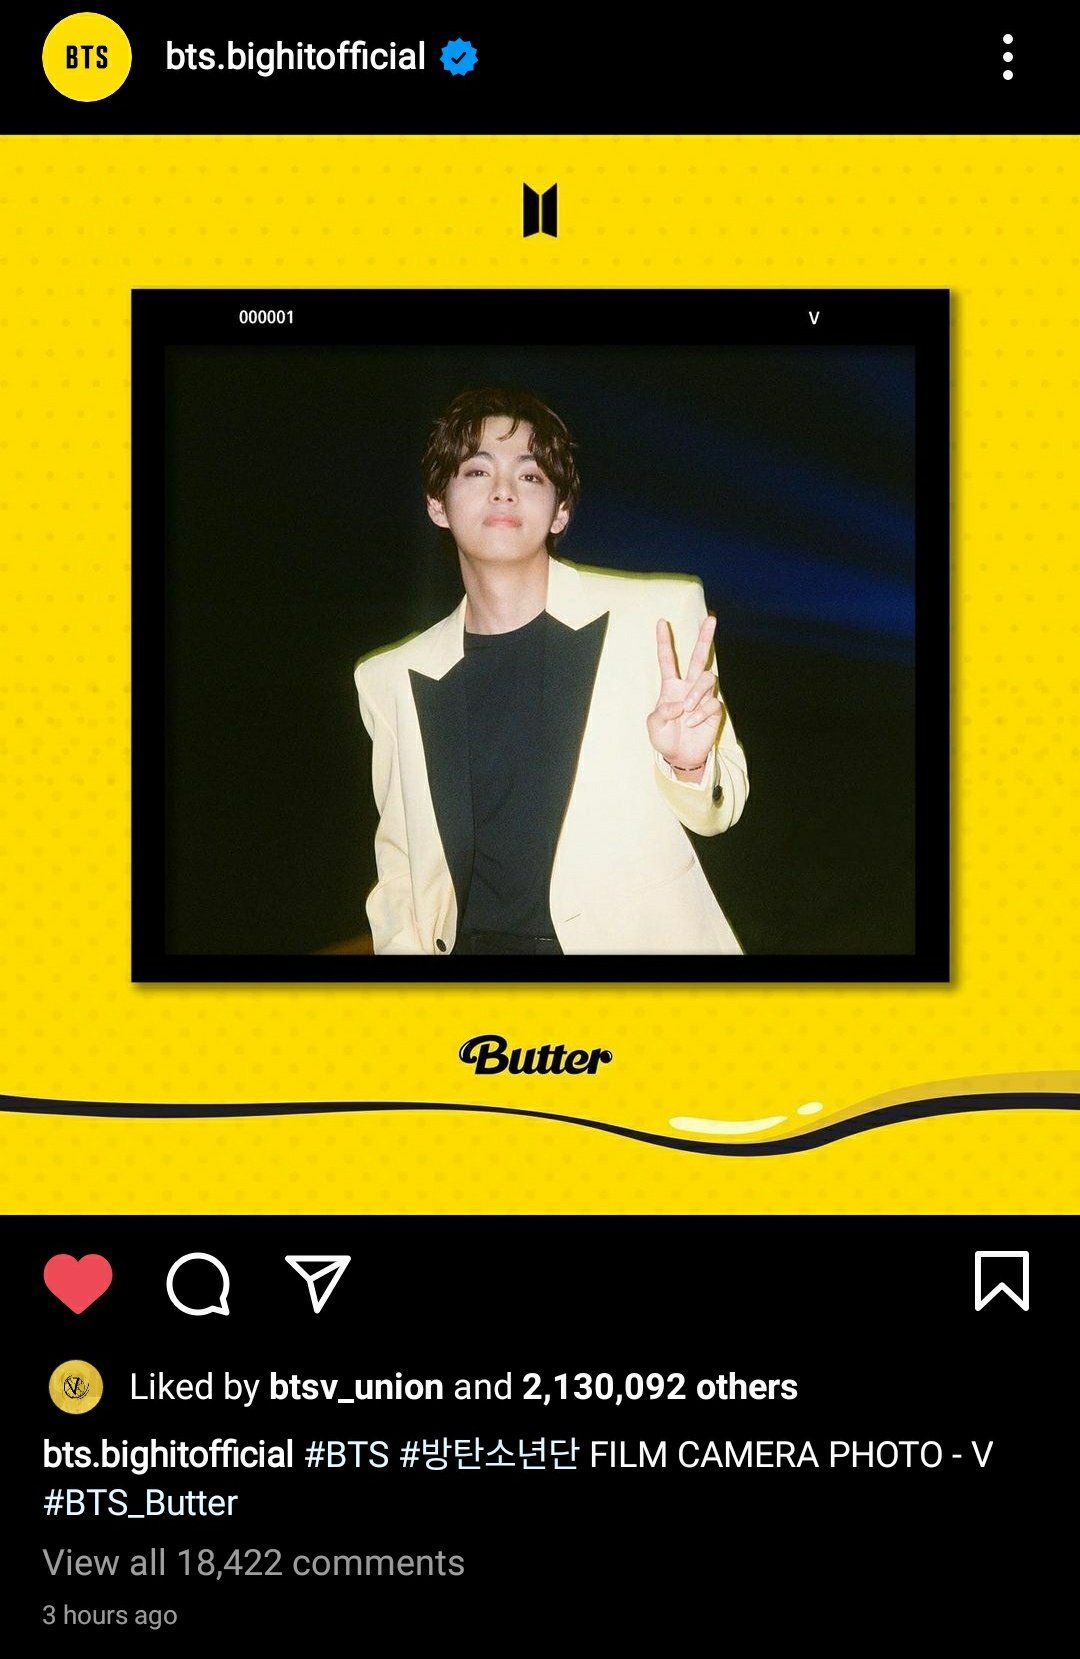 Elysha Kim Taehyung Ig Bts Butter Film Camera Photo Of Kim Taehyung Has Now Surpassed 2 000 000 Likes In Just 3 Hours The First Post To Do So Among The